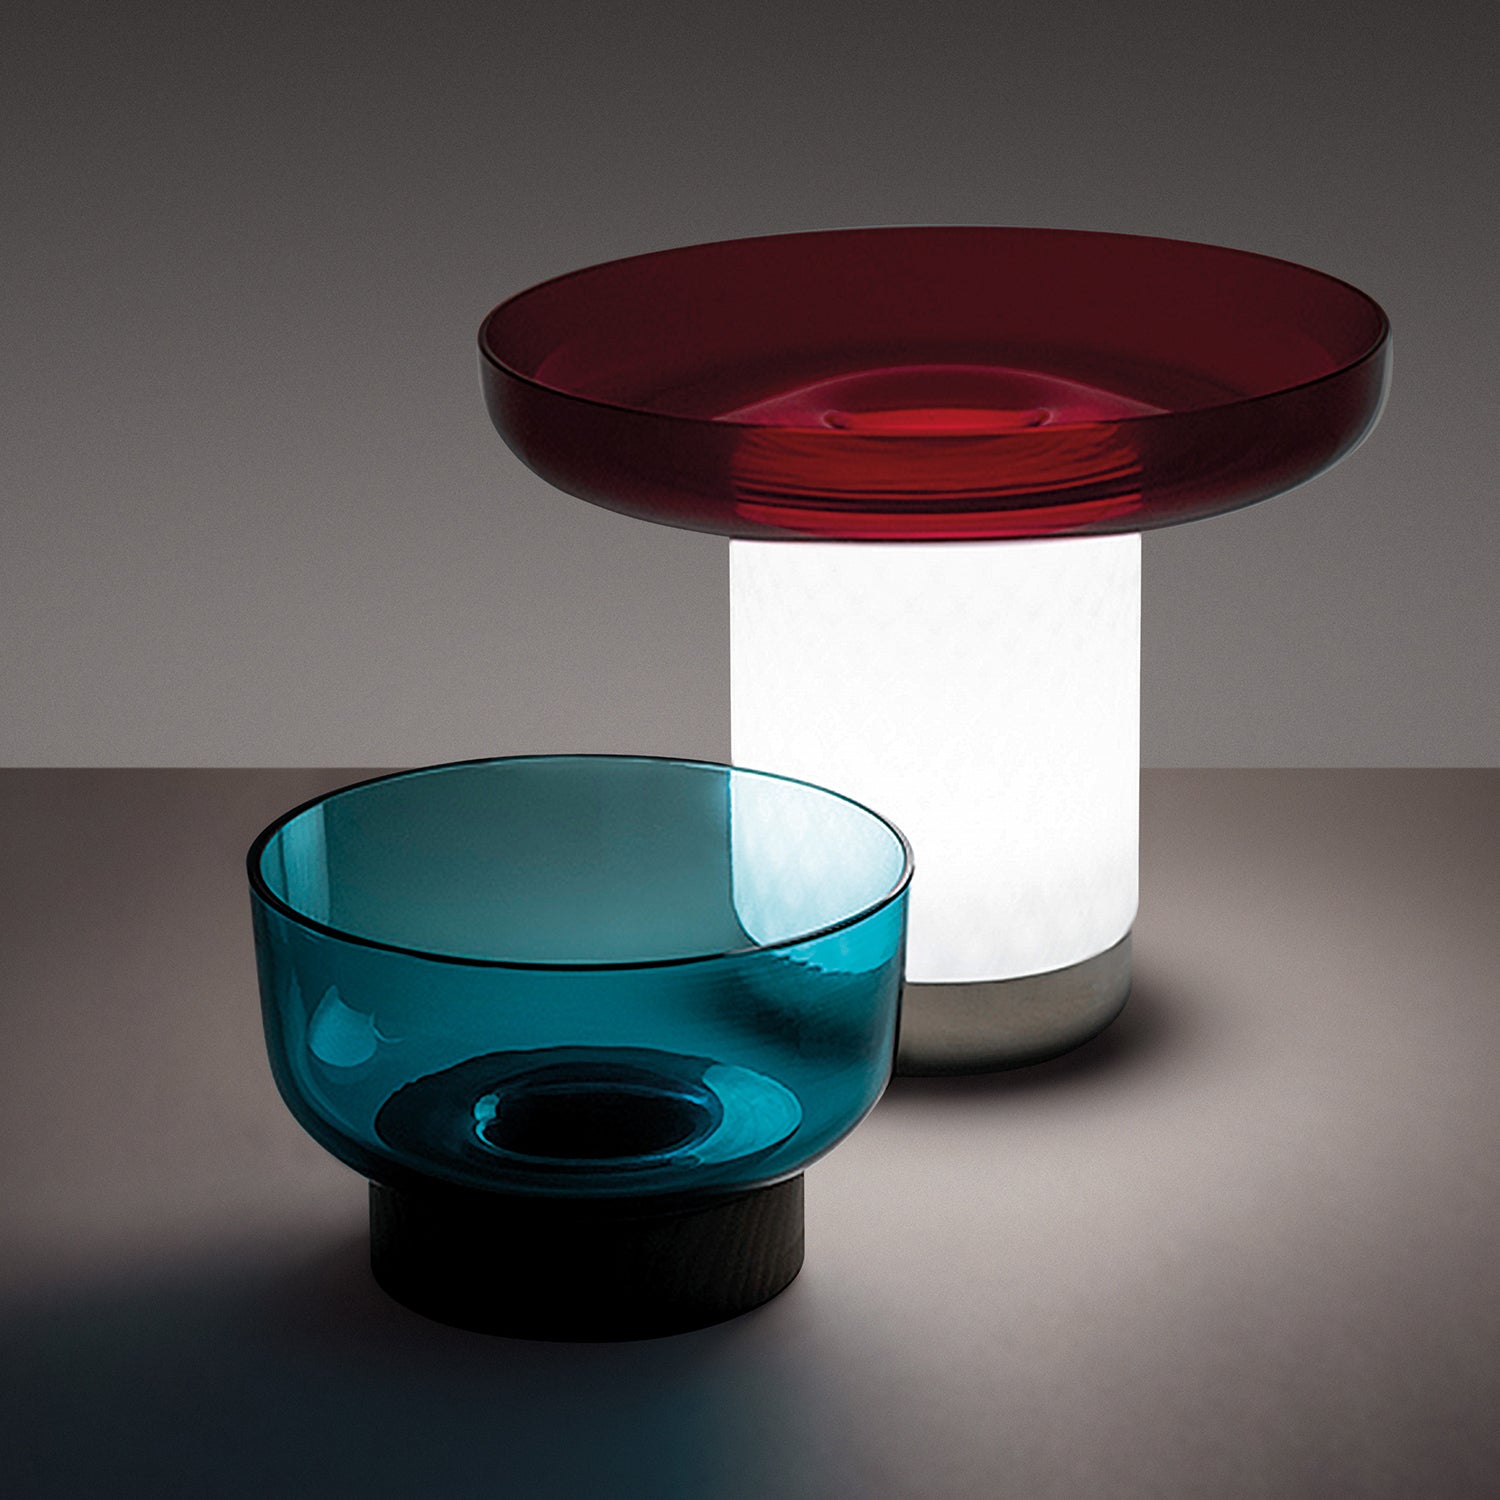 Artemide Bonta Portable Lamp & Bowl showing turquoise and red 